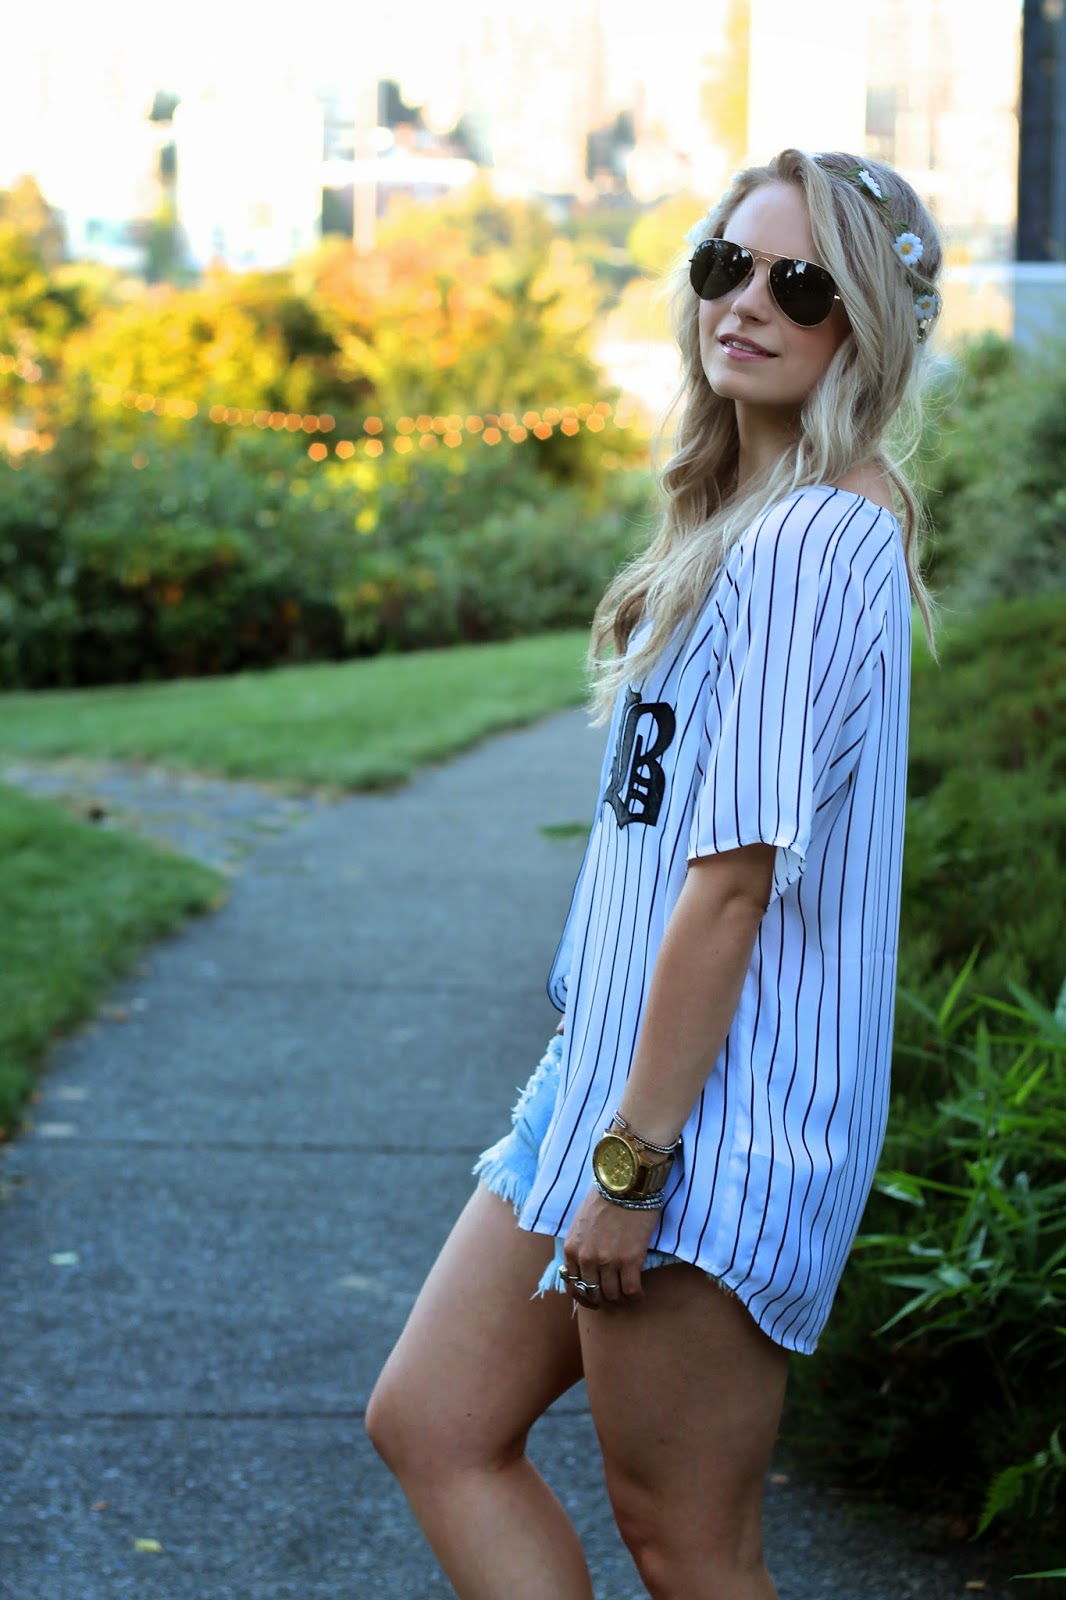 BASEBALL JERSEY AND FLOWER CROWN | ANDREA CLARE